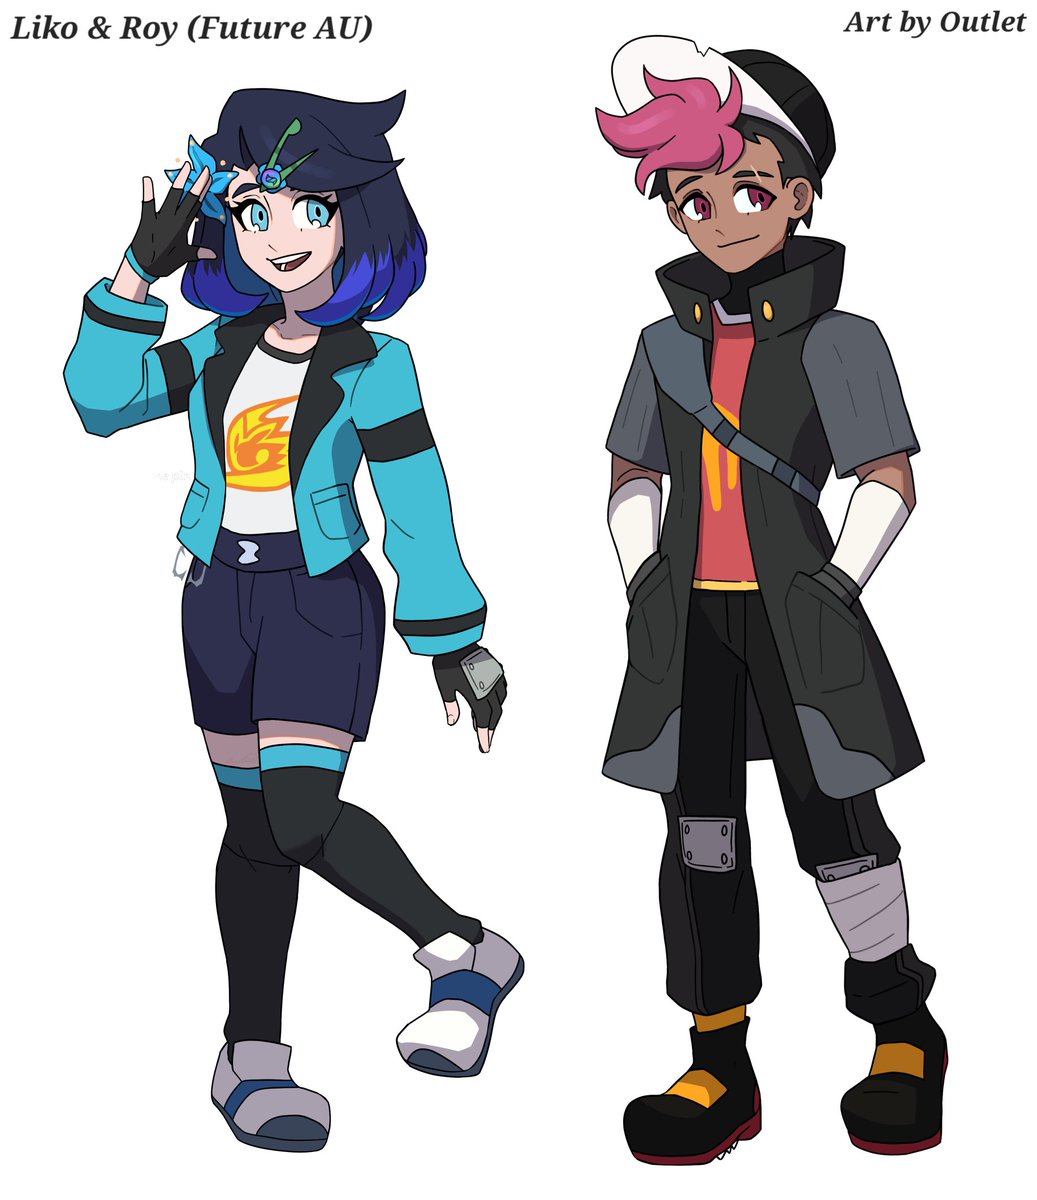 Commissioned @/aPowerOutlet to draw my Timeskip AU versions of Liko & Roy! They did a fantastic job! #anipoke #pokemonau